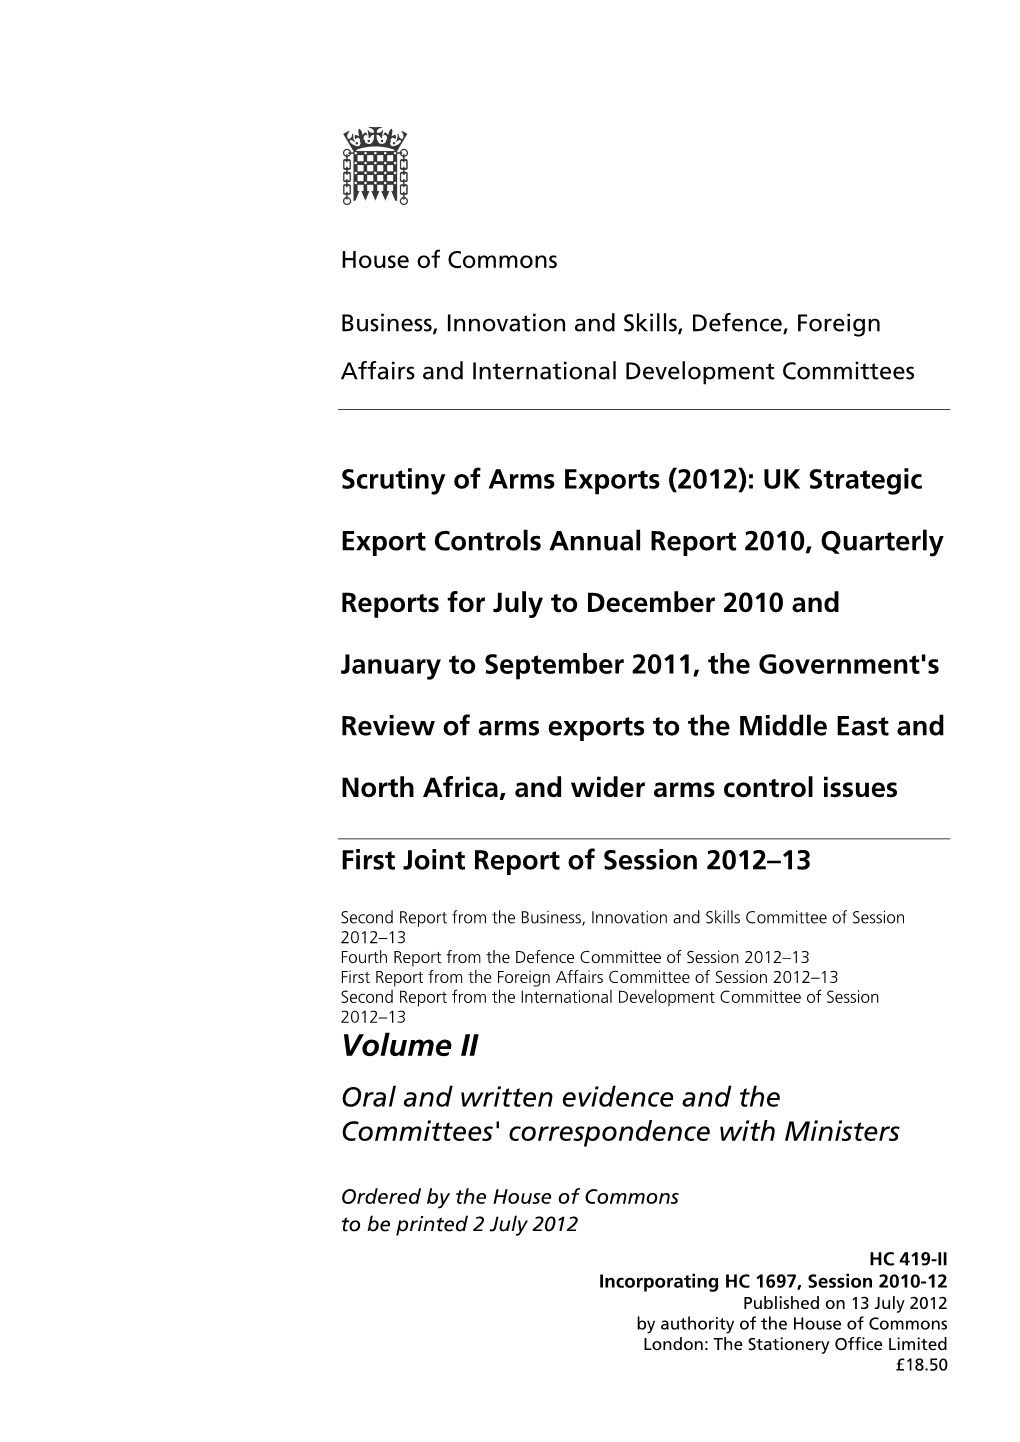 Volume II Oral and Written Evidence and the Committees' Correspondence with Ministers